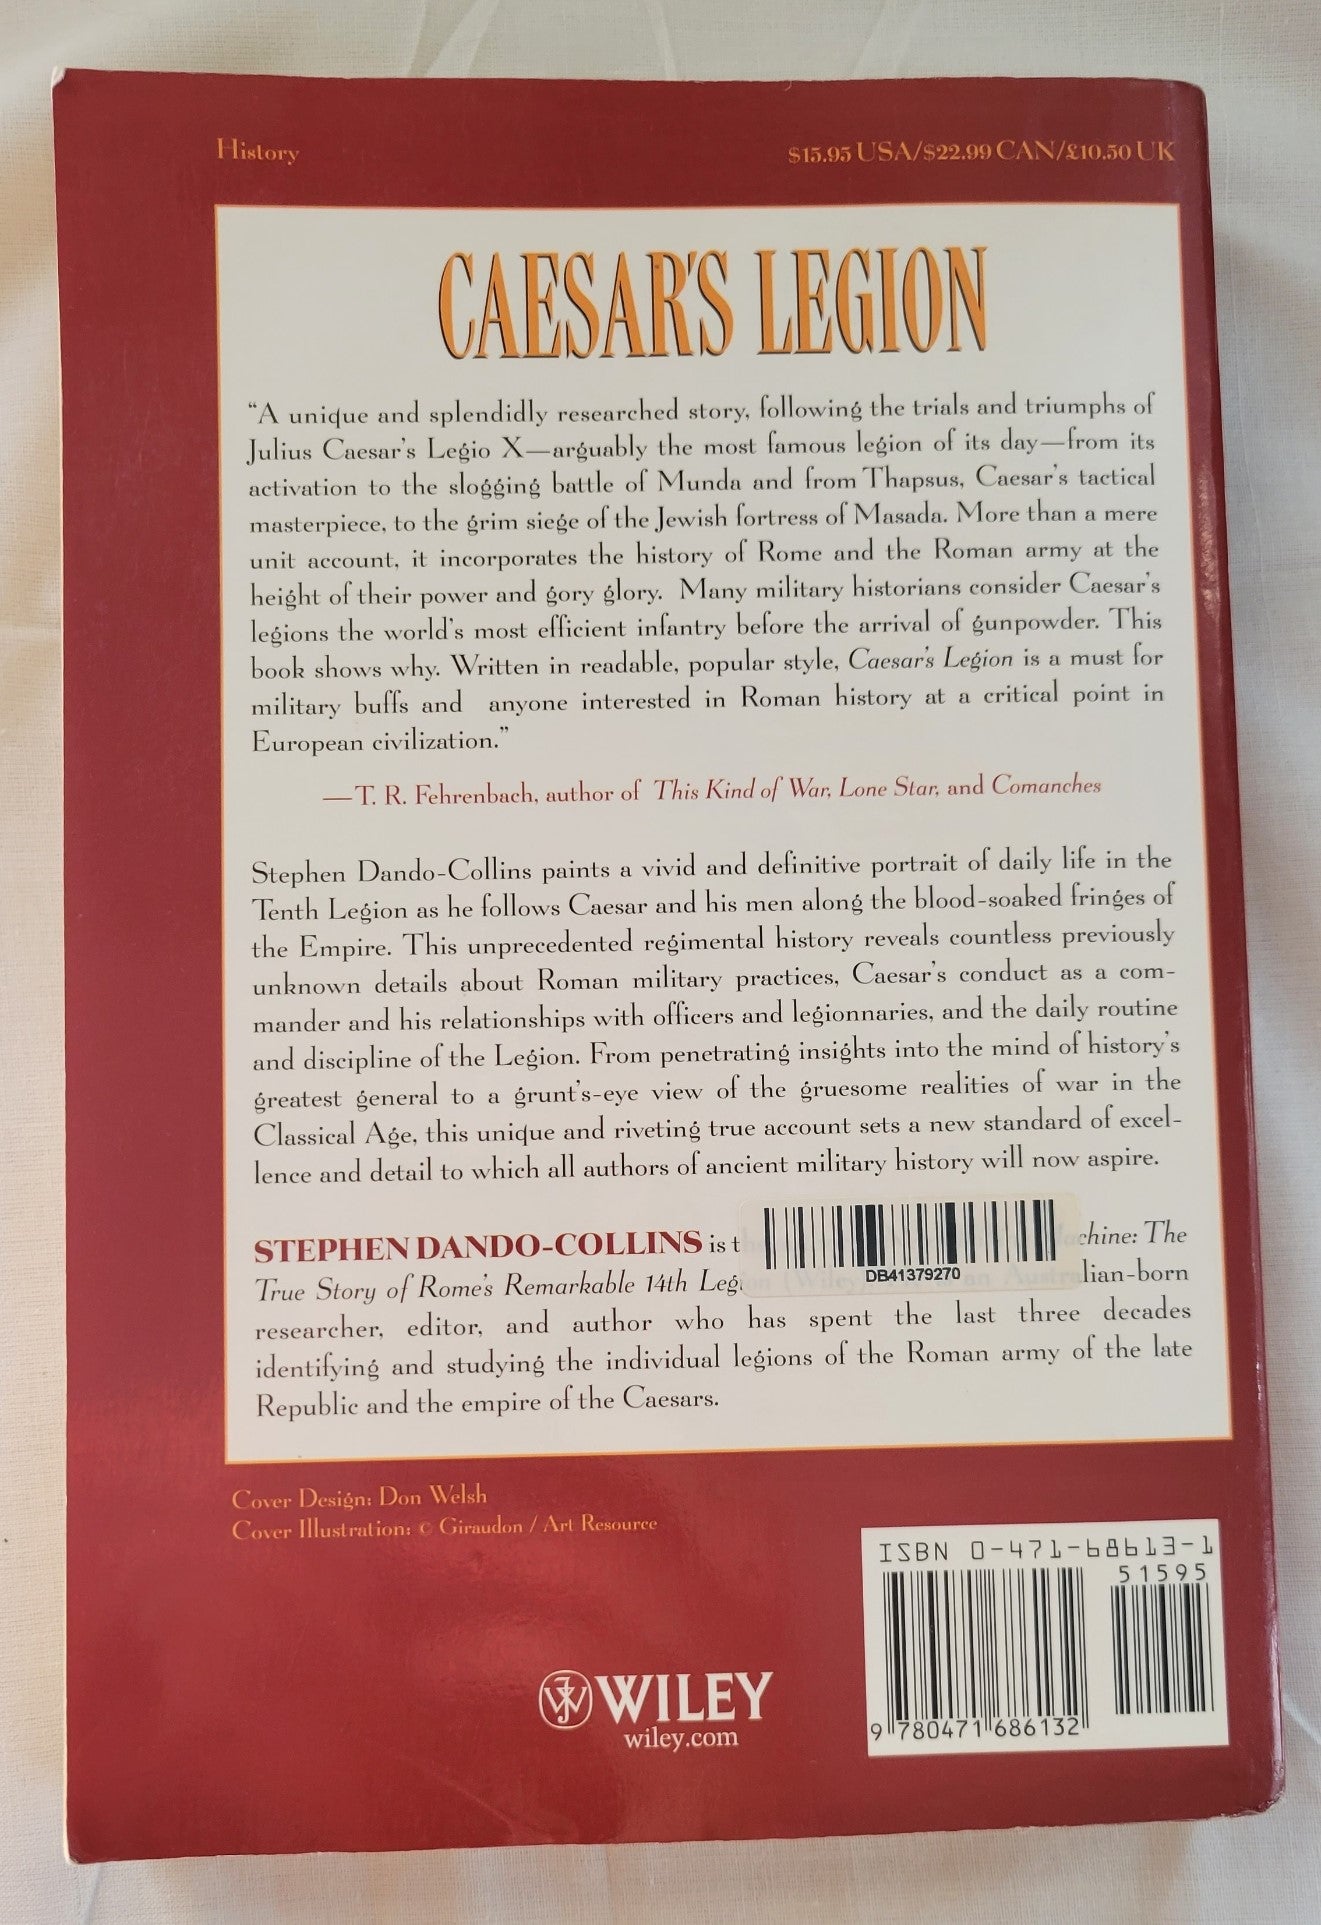 Caesar’s Legion: The Epic Saga of Julius Caesar’s Elite Tenth Legion and the Armies of Rome used book written by Stephen Dando-Collins, published by John Wiley & Sons, Inc. view of back cover.